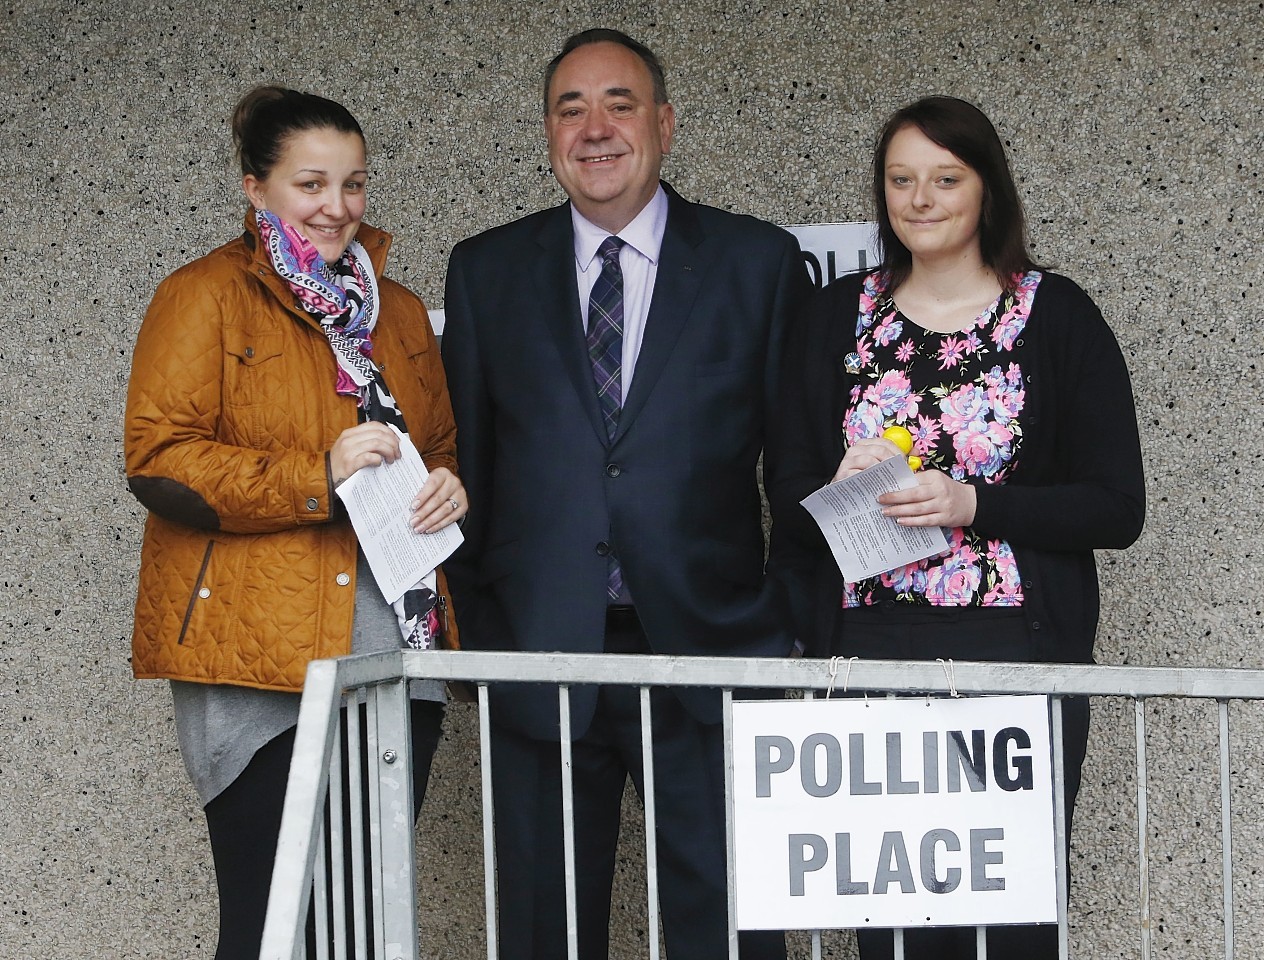 Salmond was joined by first time voters this morning